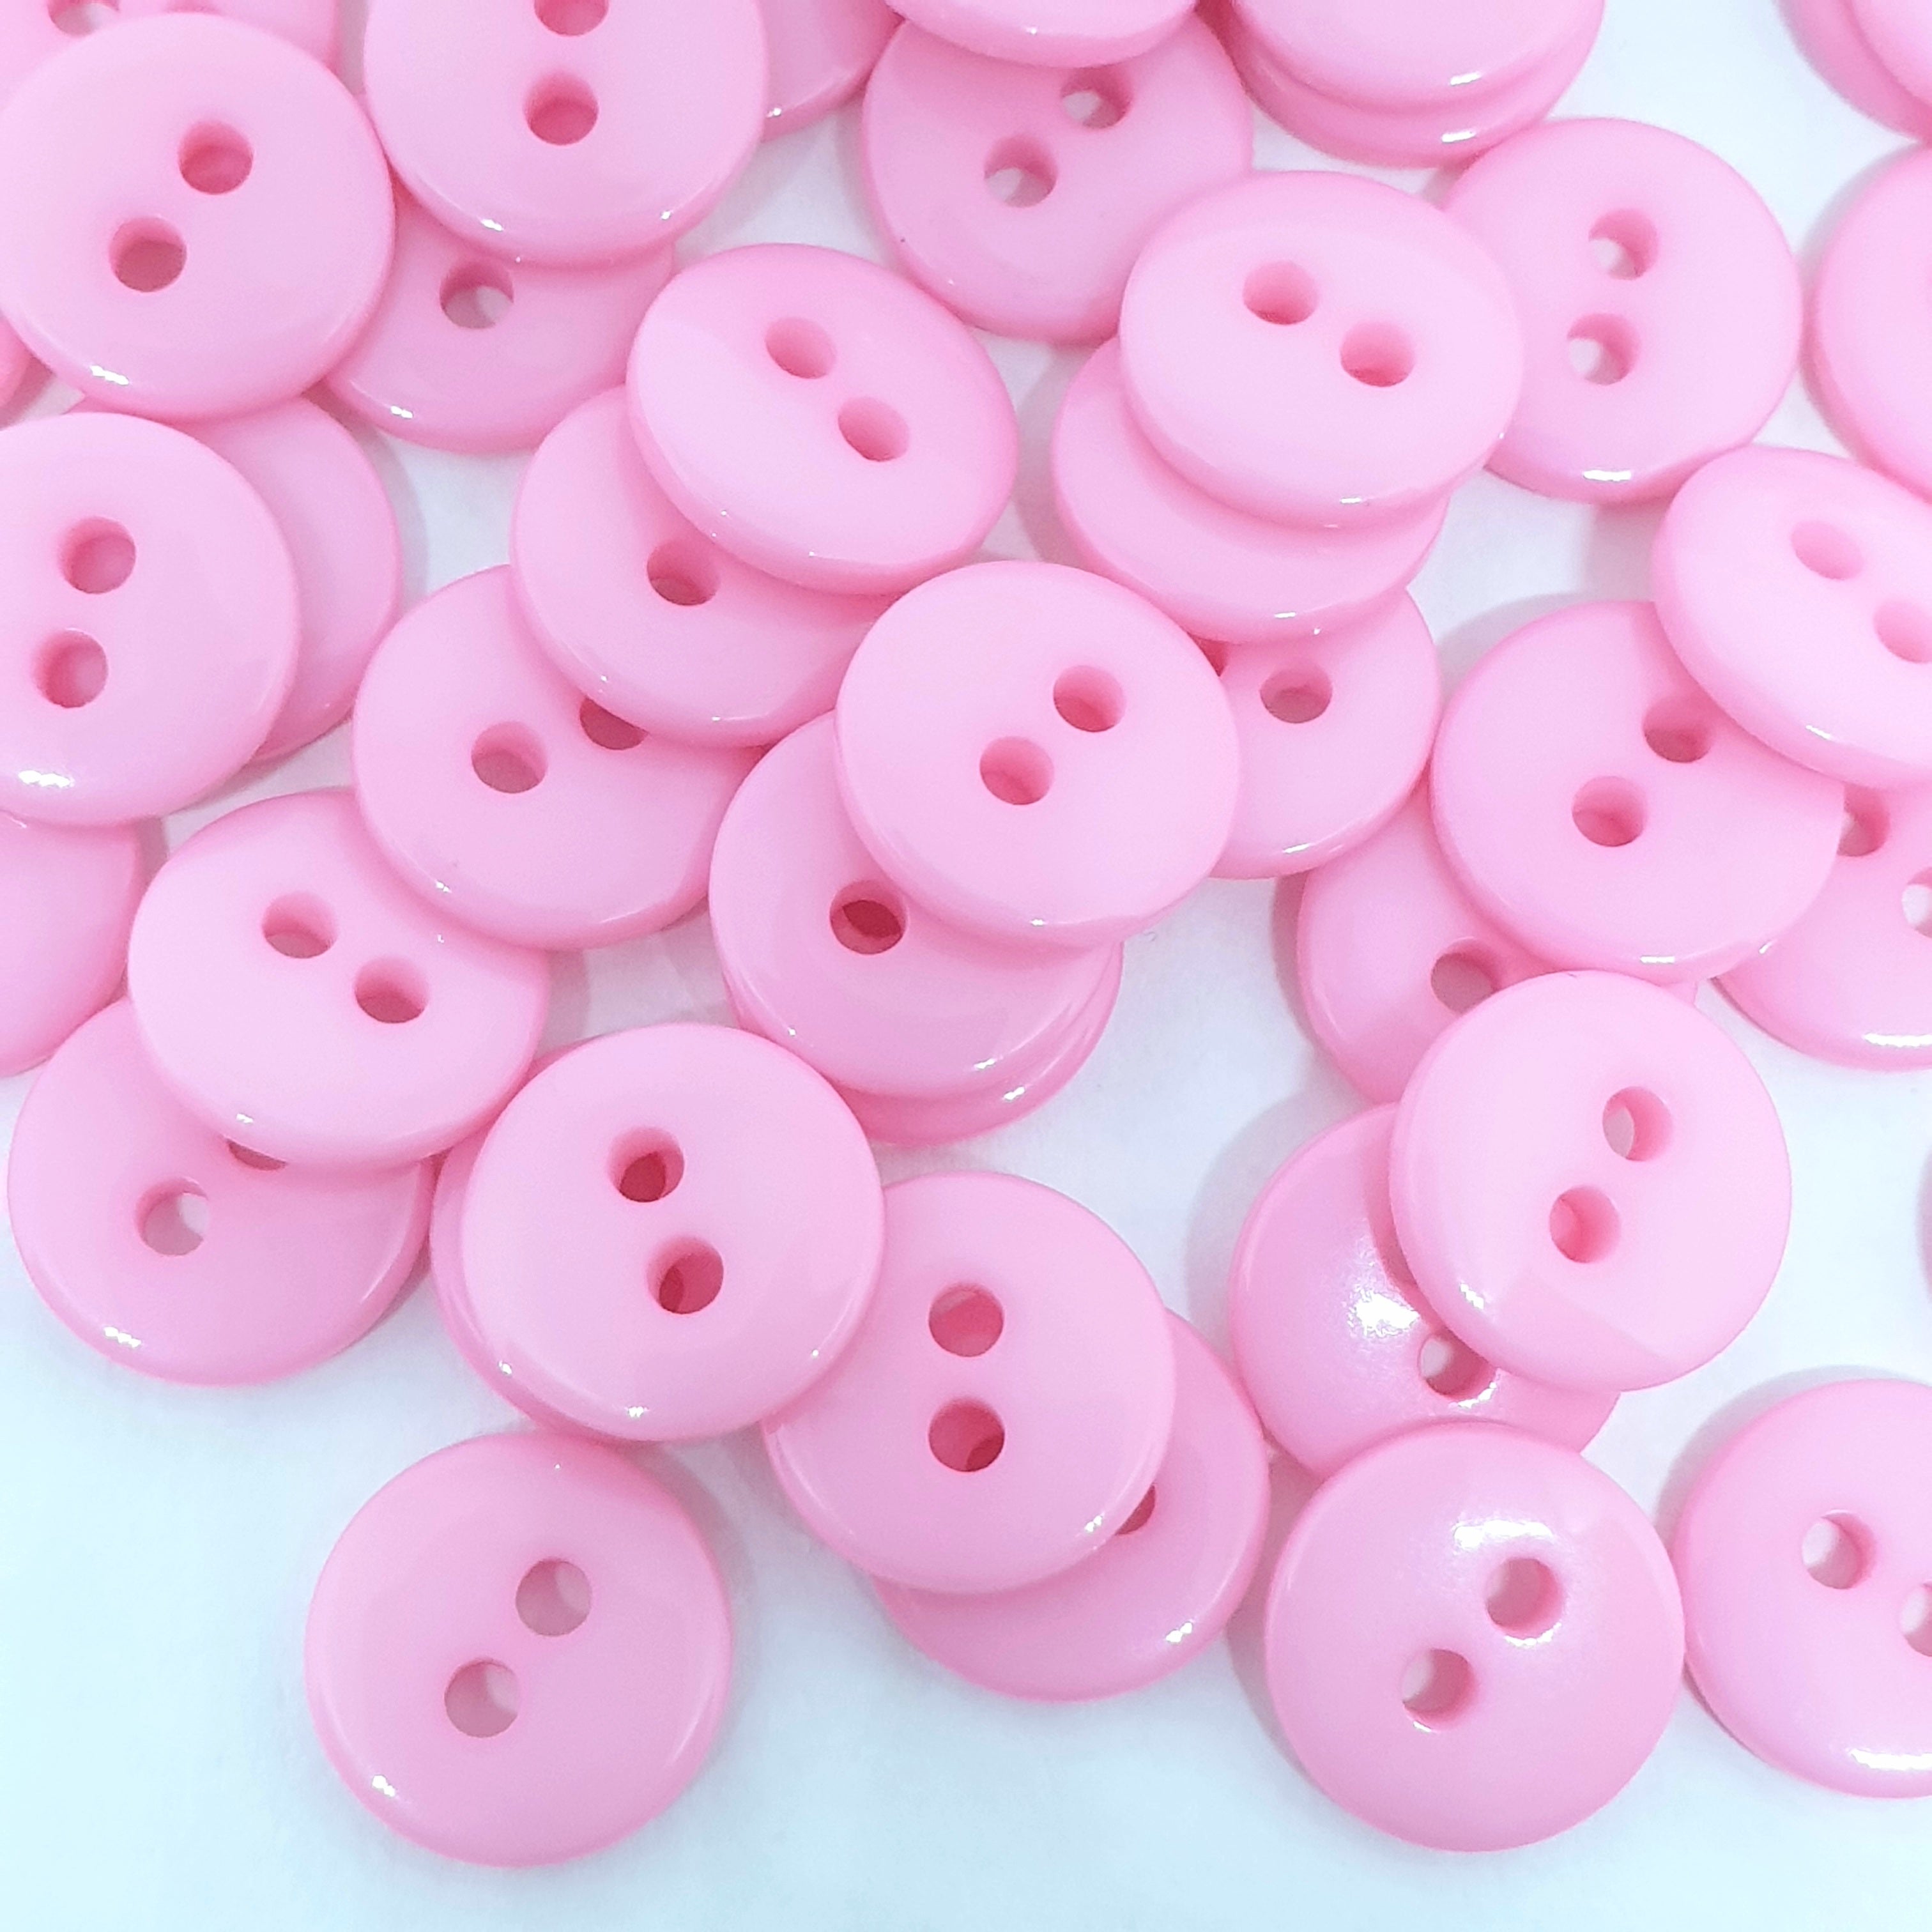 MajorCrafts 120pcs 9mm Rose Pink 2 Holes Small Round Resin Sewing Buttons B04